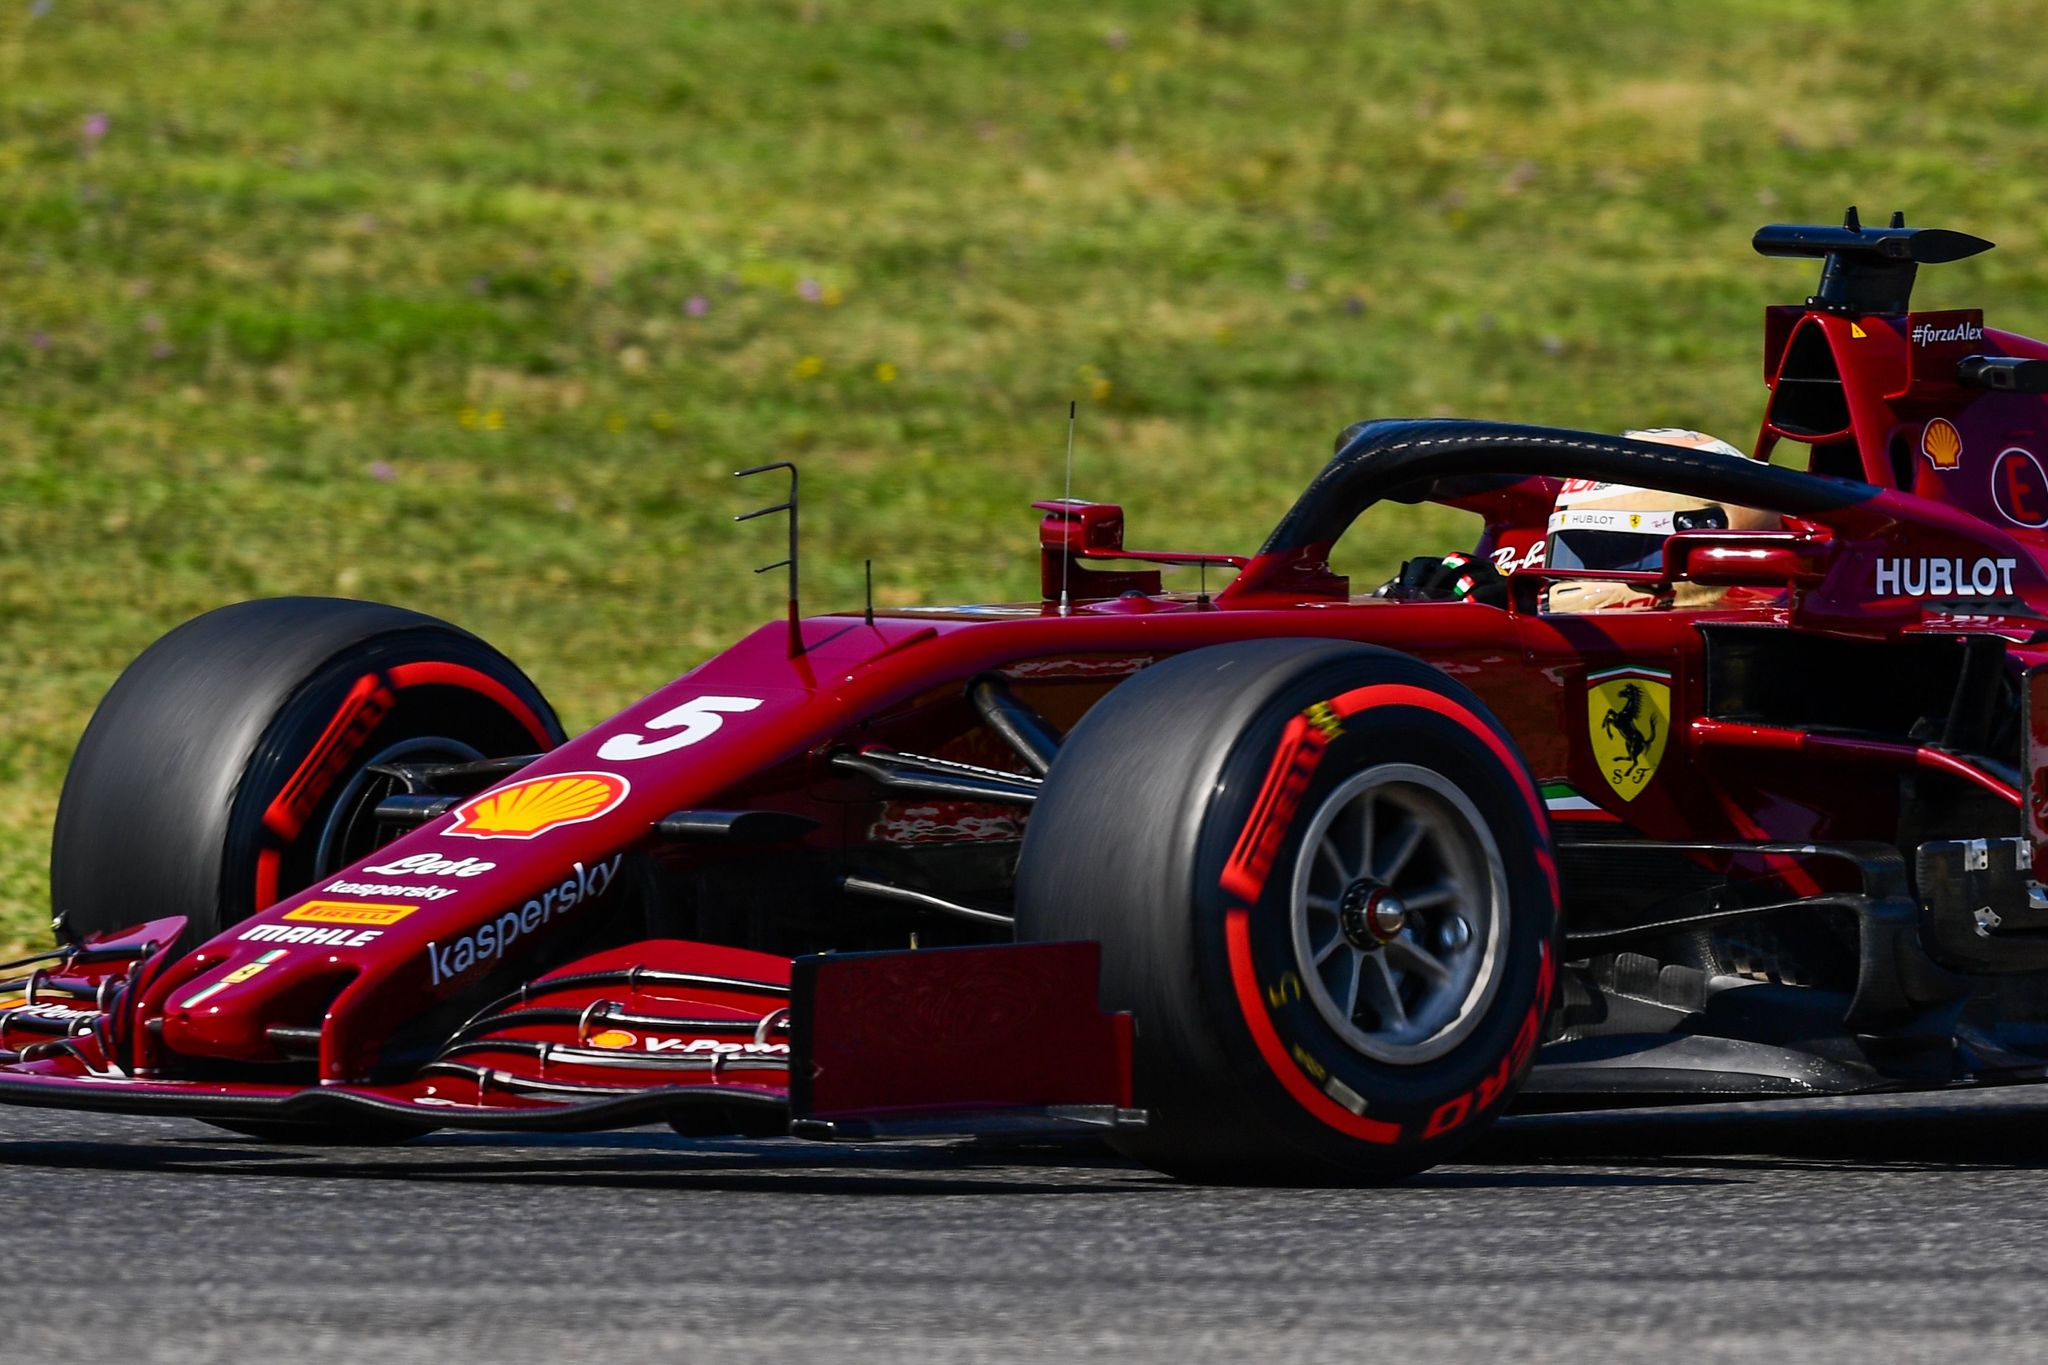 Ferrari's German driver Sebastian lt;HIT gt;Vettel lt;/HIT gt; drives during the first practice session at the Mugello circuit ahead of the Tuscany Formula One Grand Prix in Scarperia e San Piero on September 11, 2020. (Photo by Miguel MEDINA / AFP)